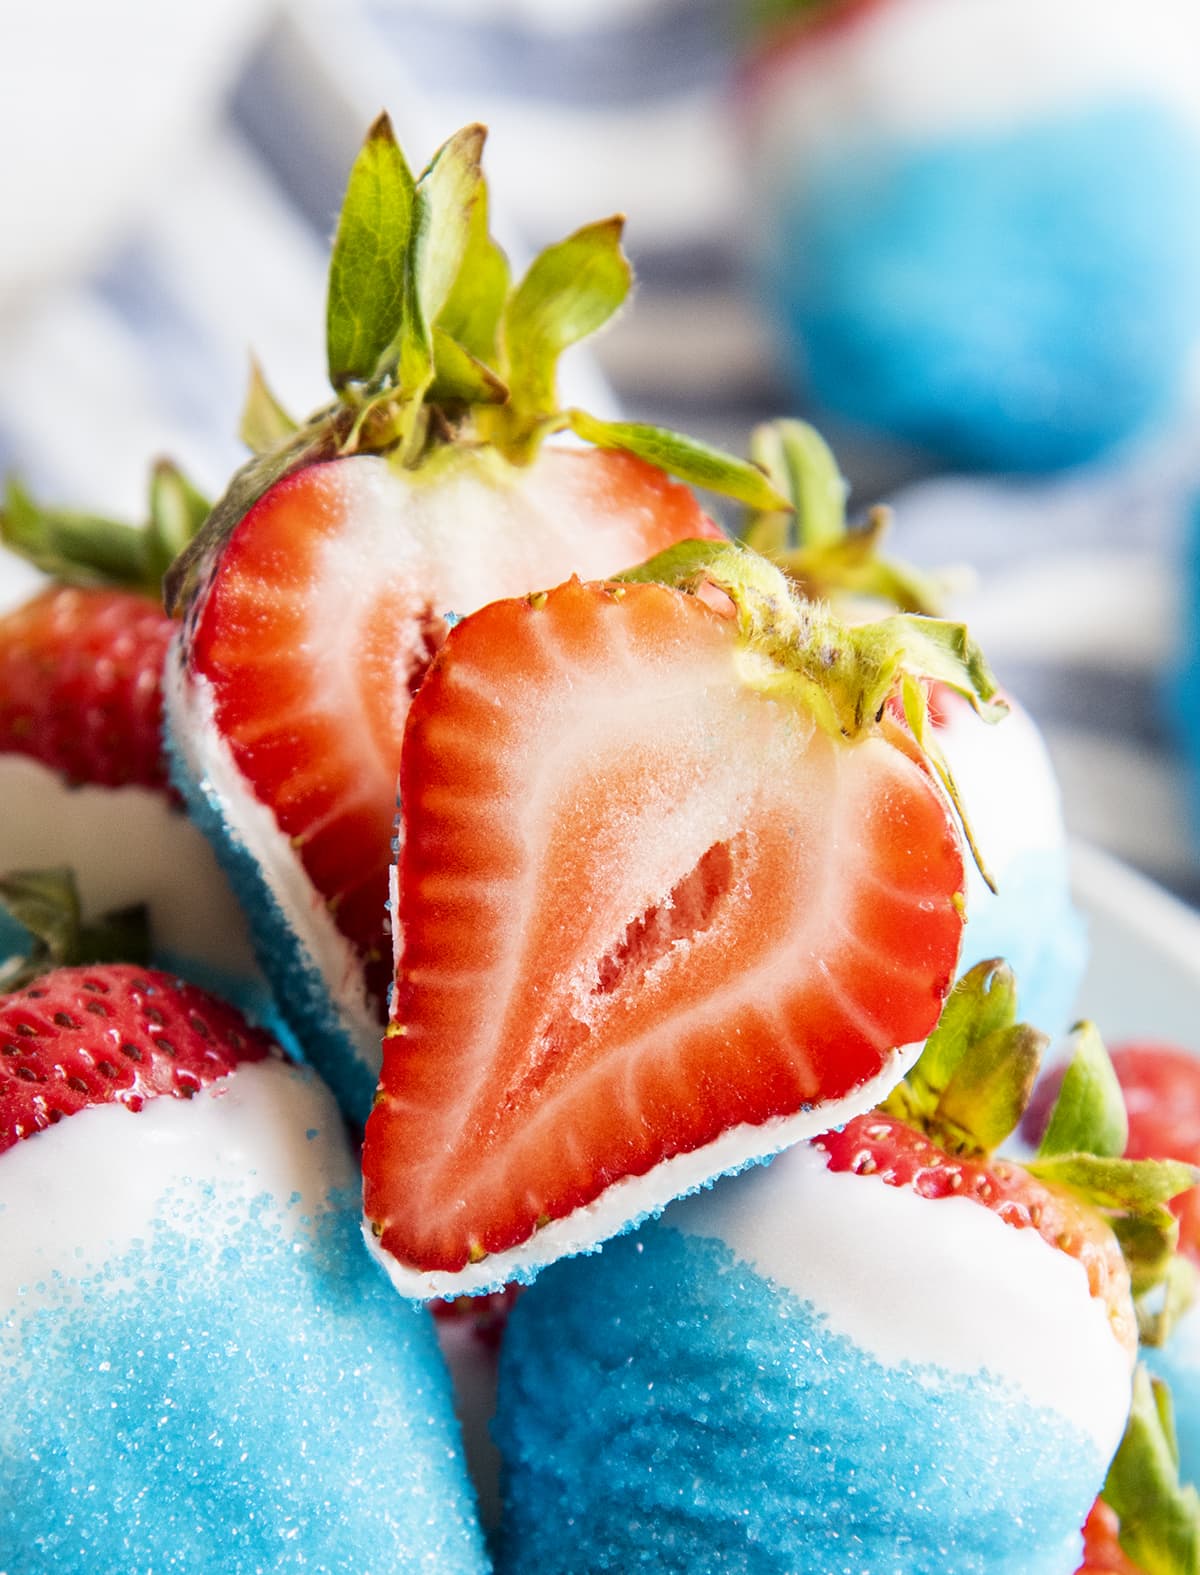 A red white and blue strawberry cut open showing the middle of the strawberry.